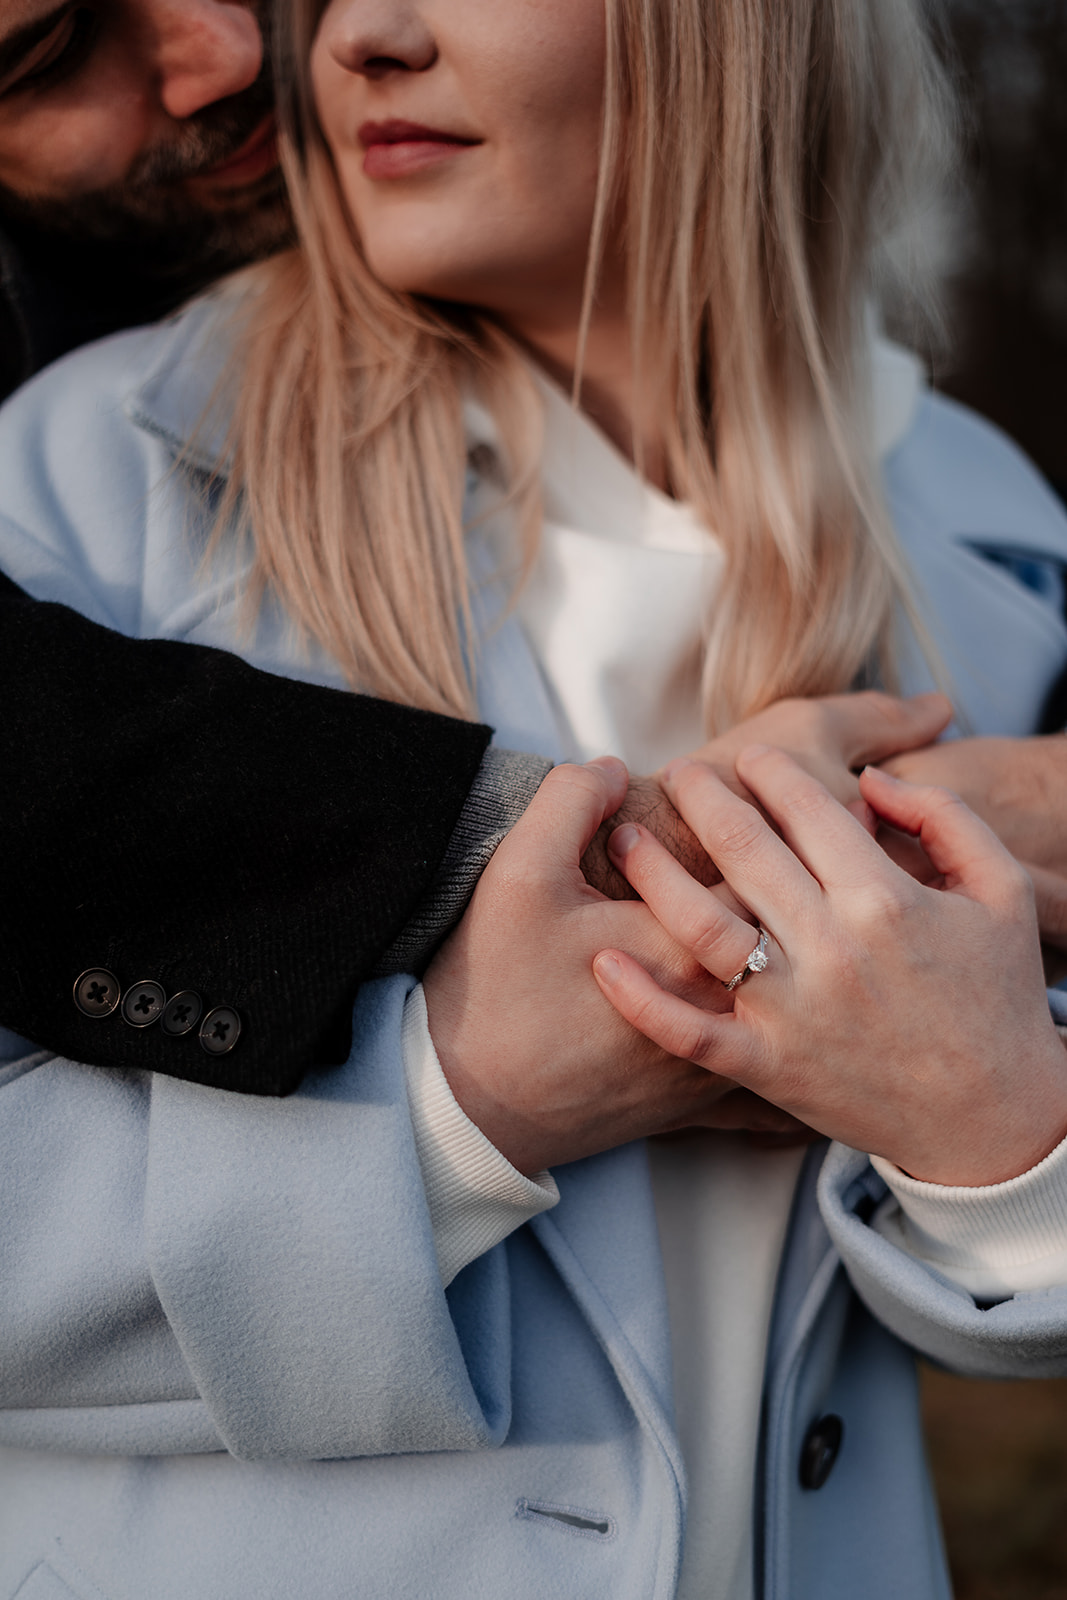 A couple's hands clasped together as he wraps his arms around her, her engagement ring clearly visible